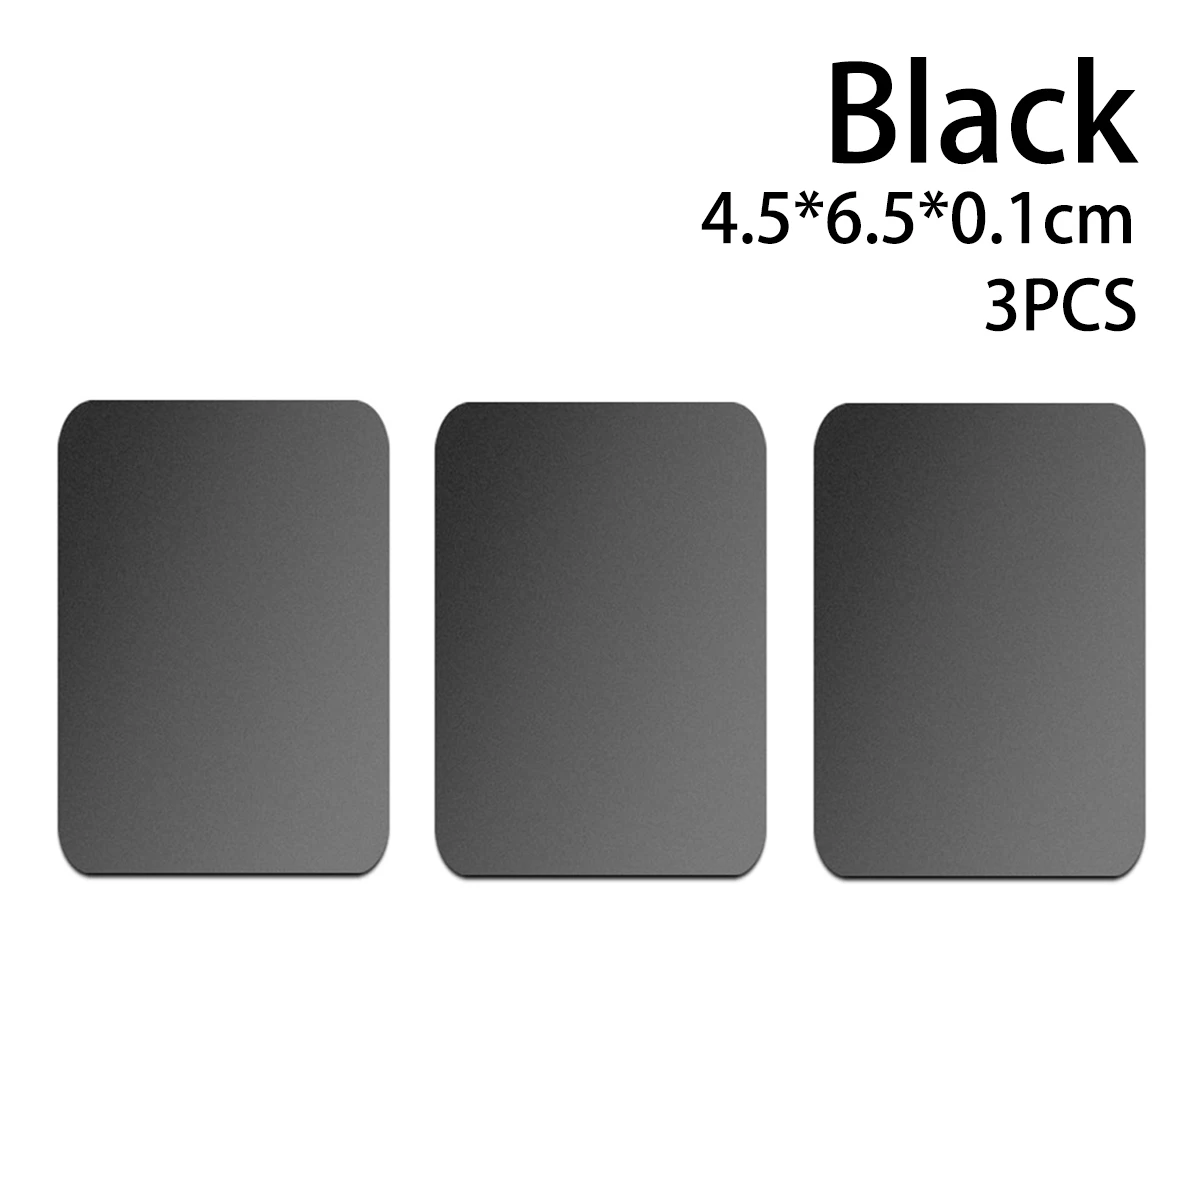 Car Magnetic Bracket Metal Plate Car Disk Magnet Plate Ultra-Thin Sticker Magnetic Phone Bracket GPS Universal Accessories - Цвет: Black Square 3pieces